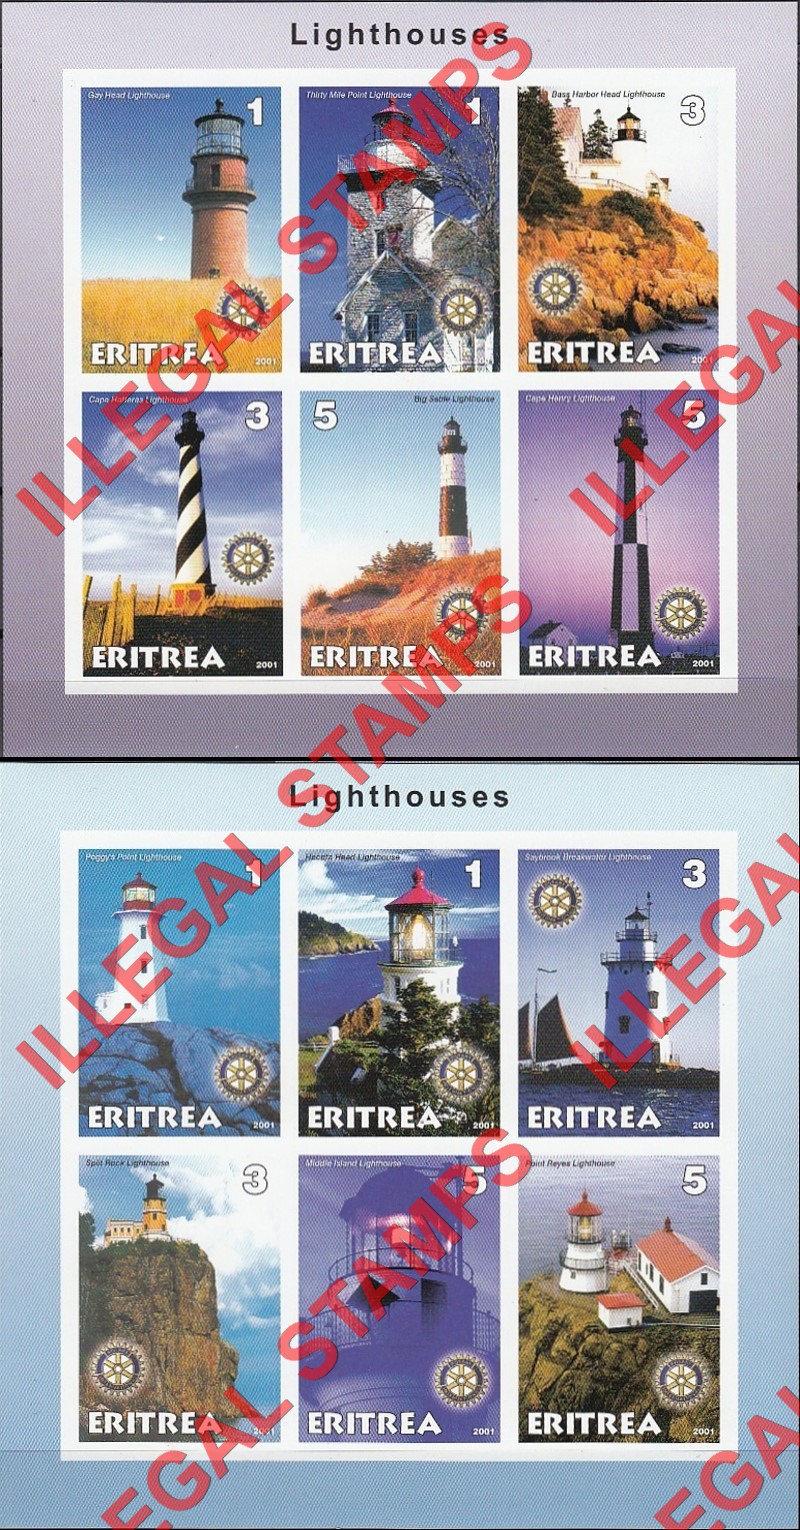 Eritrea 2001 Lighthouses Counterfeit Illegal Stamp Souvenir Sheets of 6